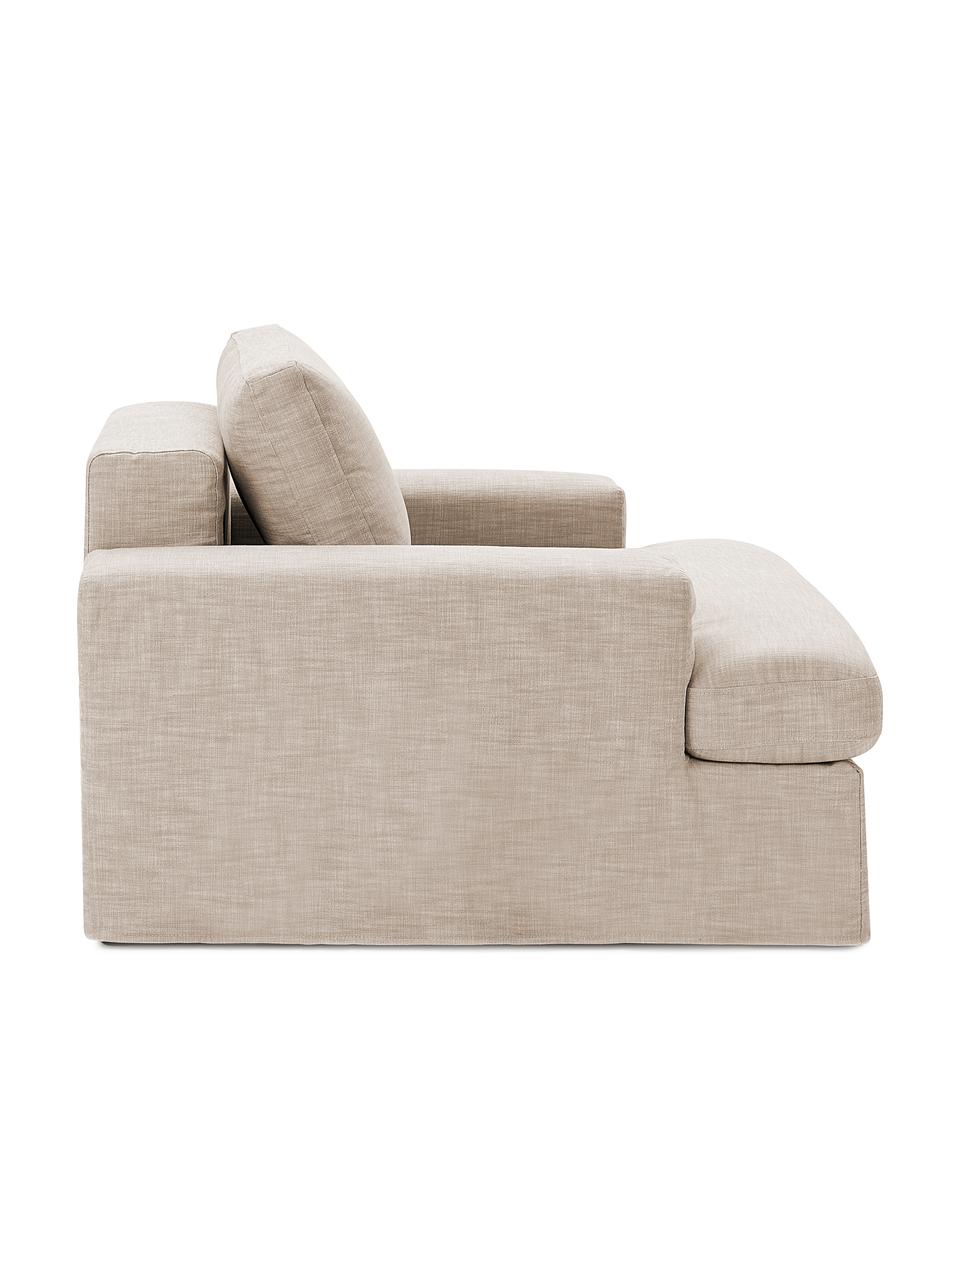 Fauteuil taupe Russell, Tissu taupe, larg. 103 x haut. 77 cm